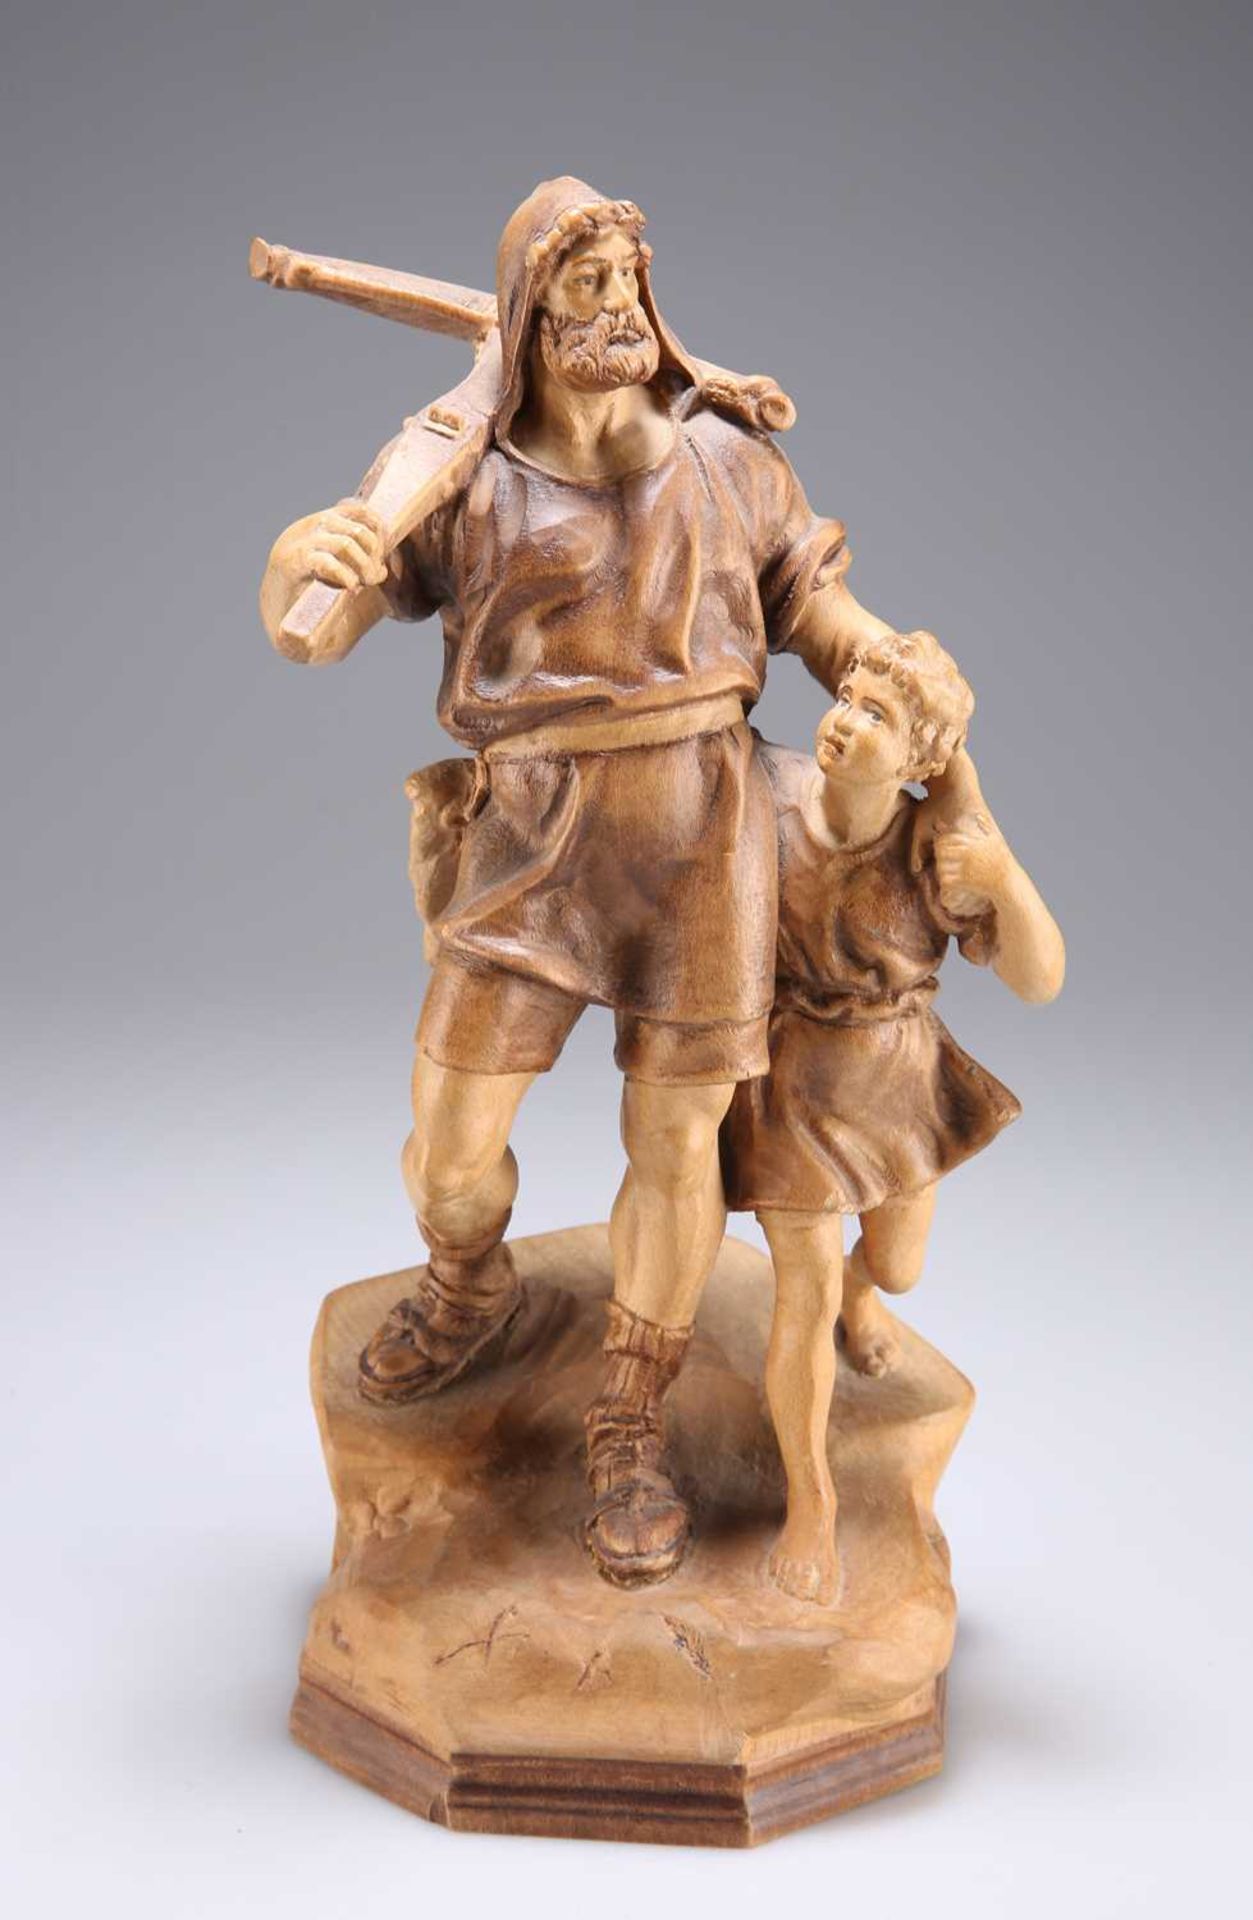 A SWISS CARVED FIGURE GROUP OF WILLIAM TELL AND HIS SON, CIRCA 1900